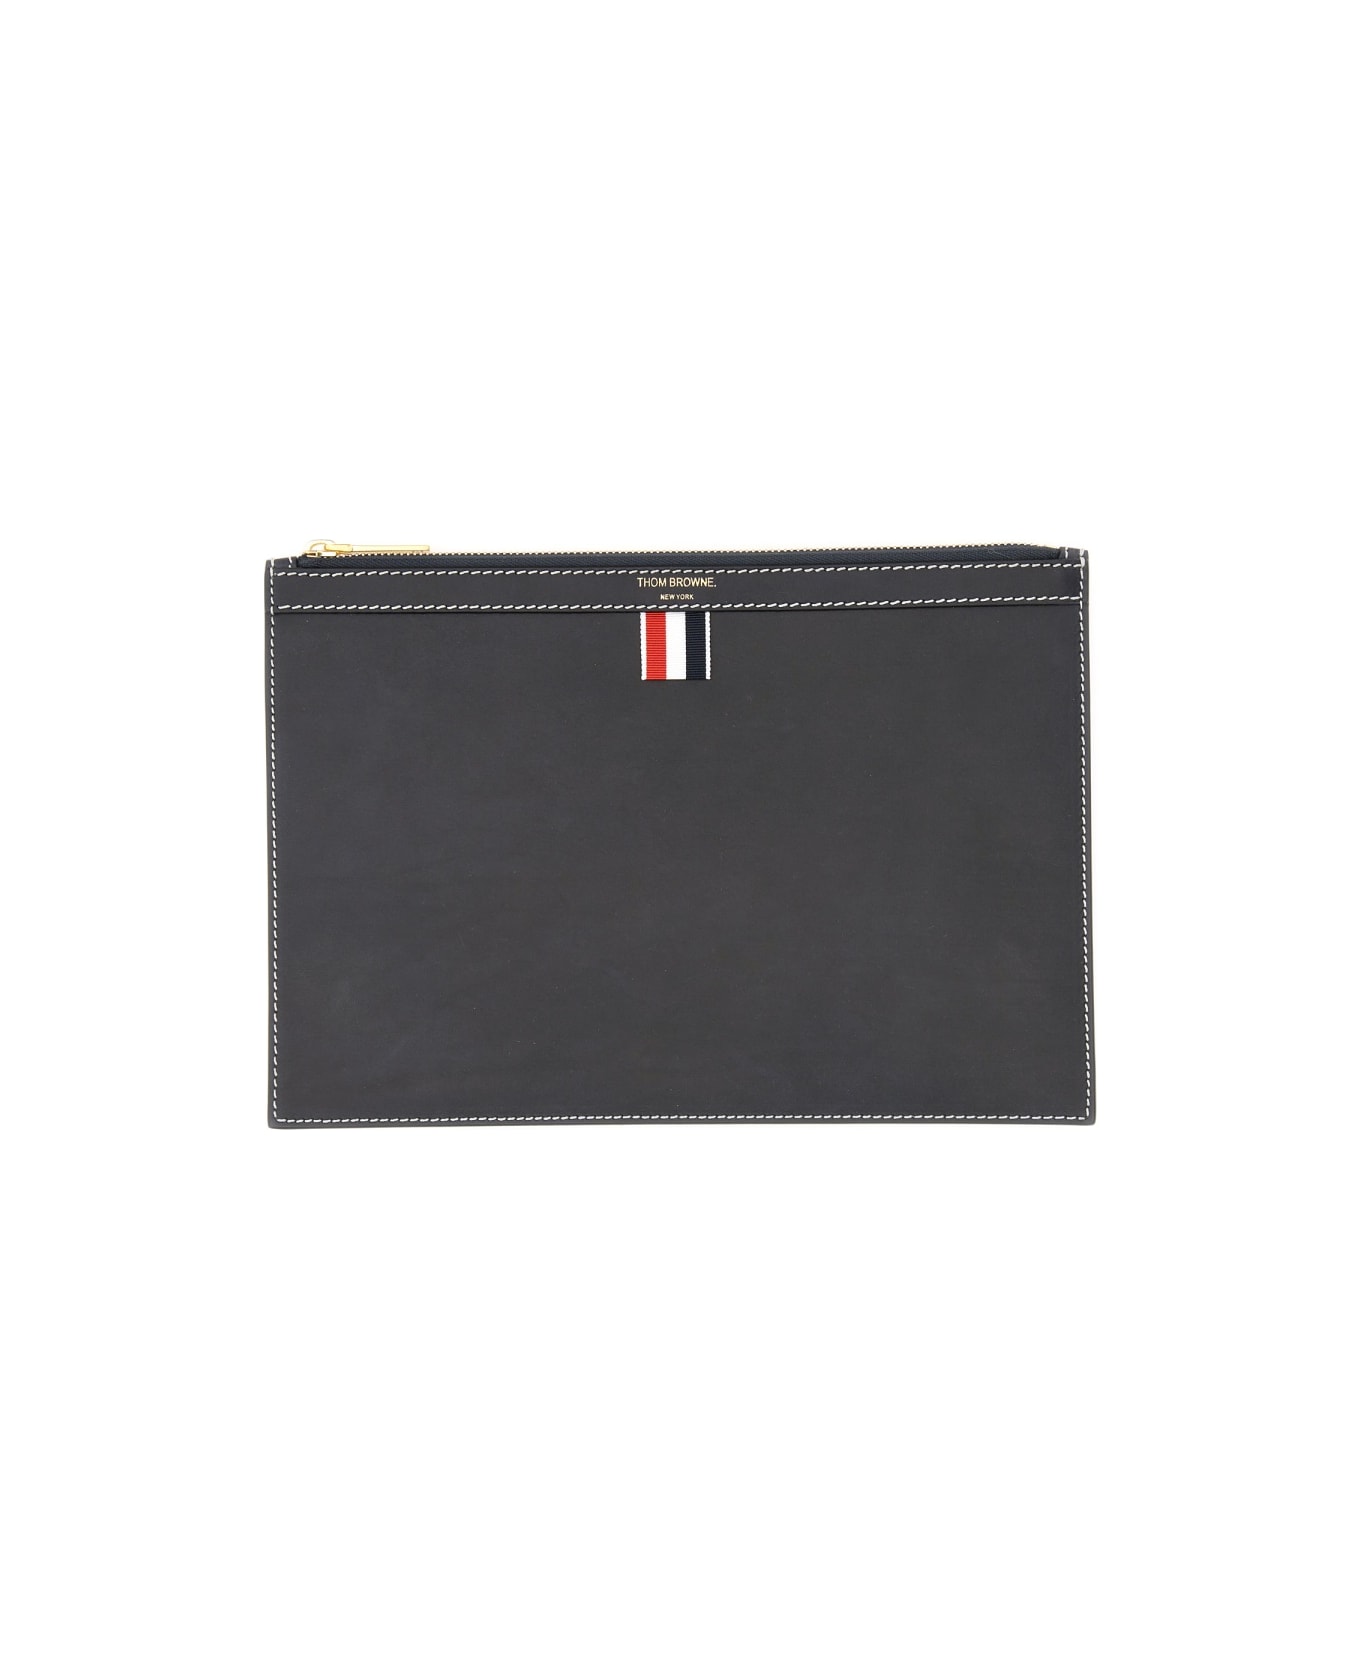 Thom Browne Small Tablet Holder - BLUE